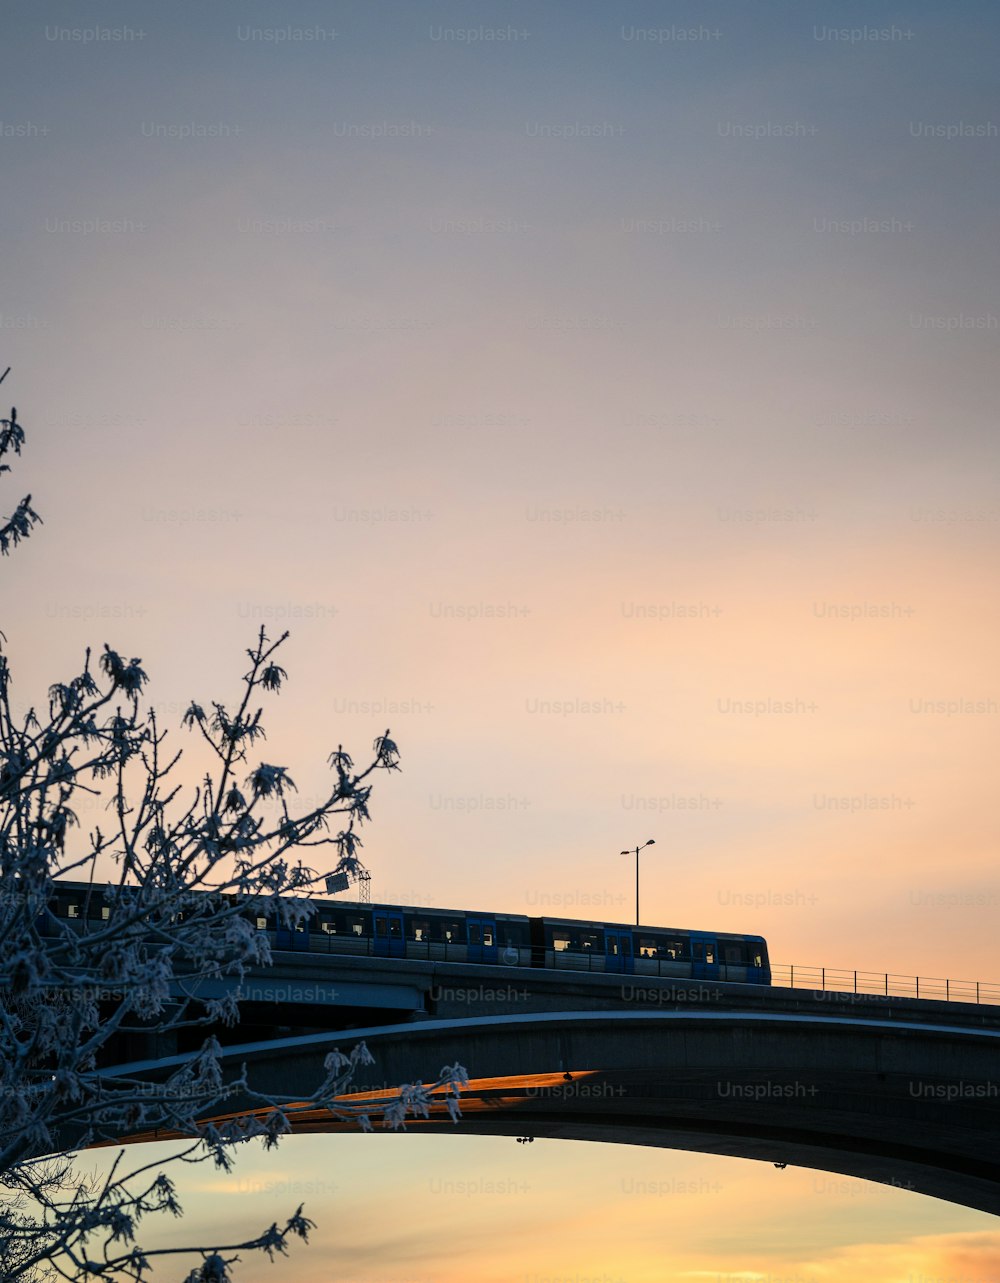 a train traveling over a bridge at sunset